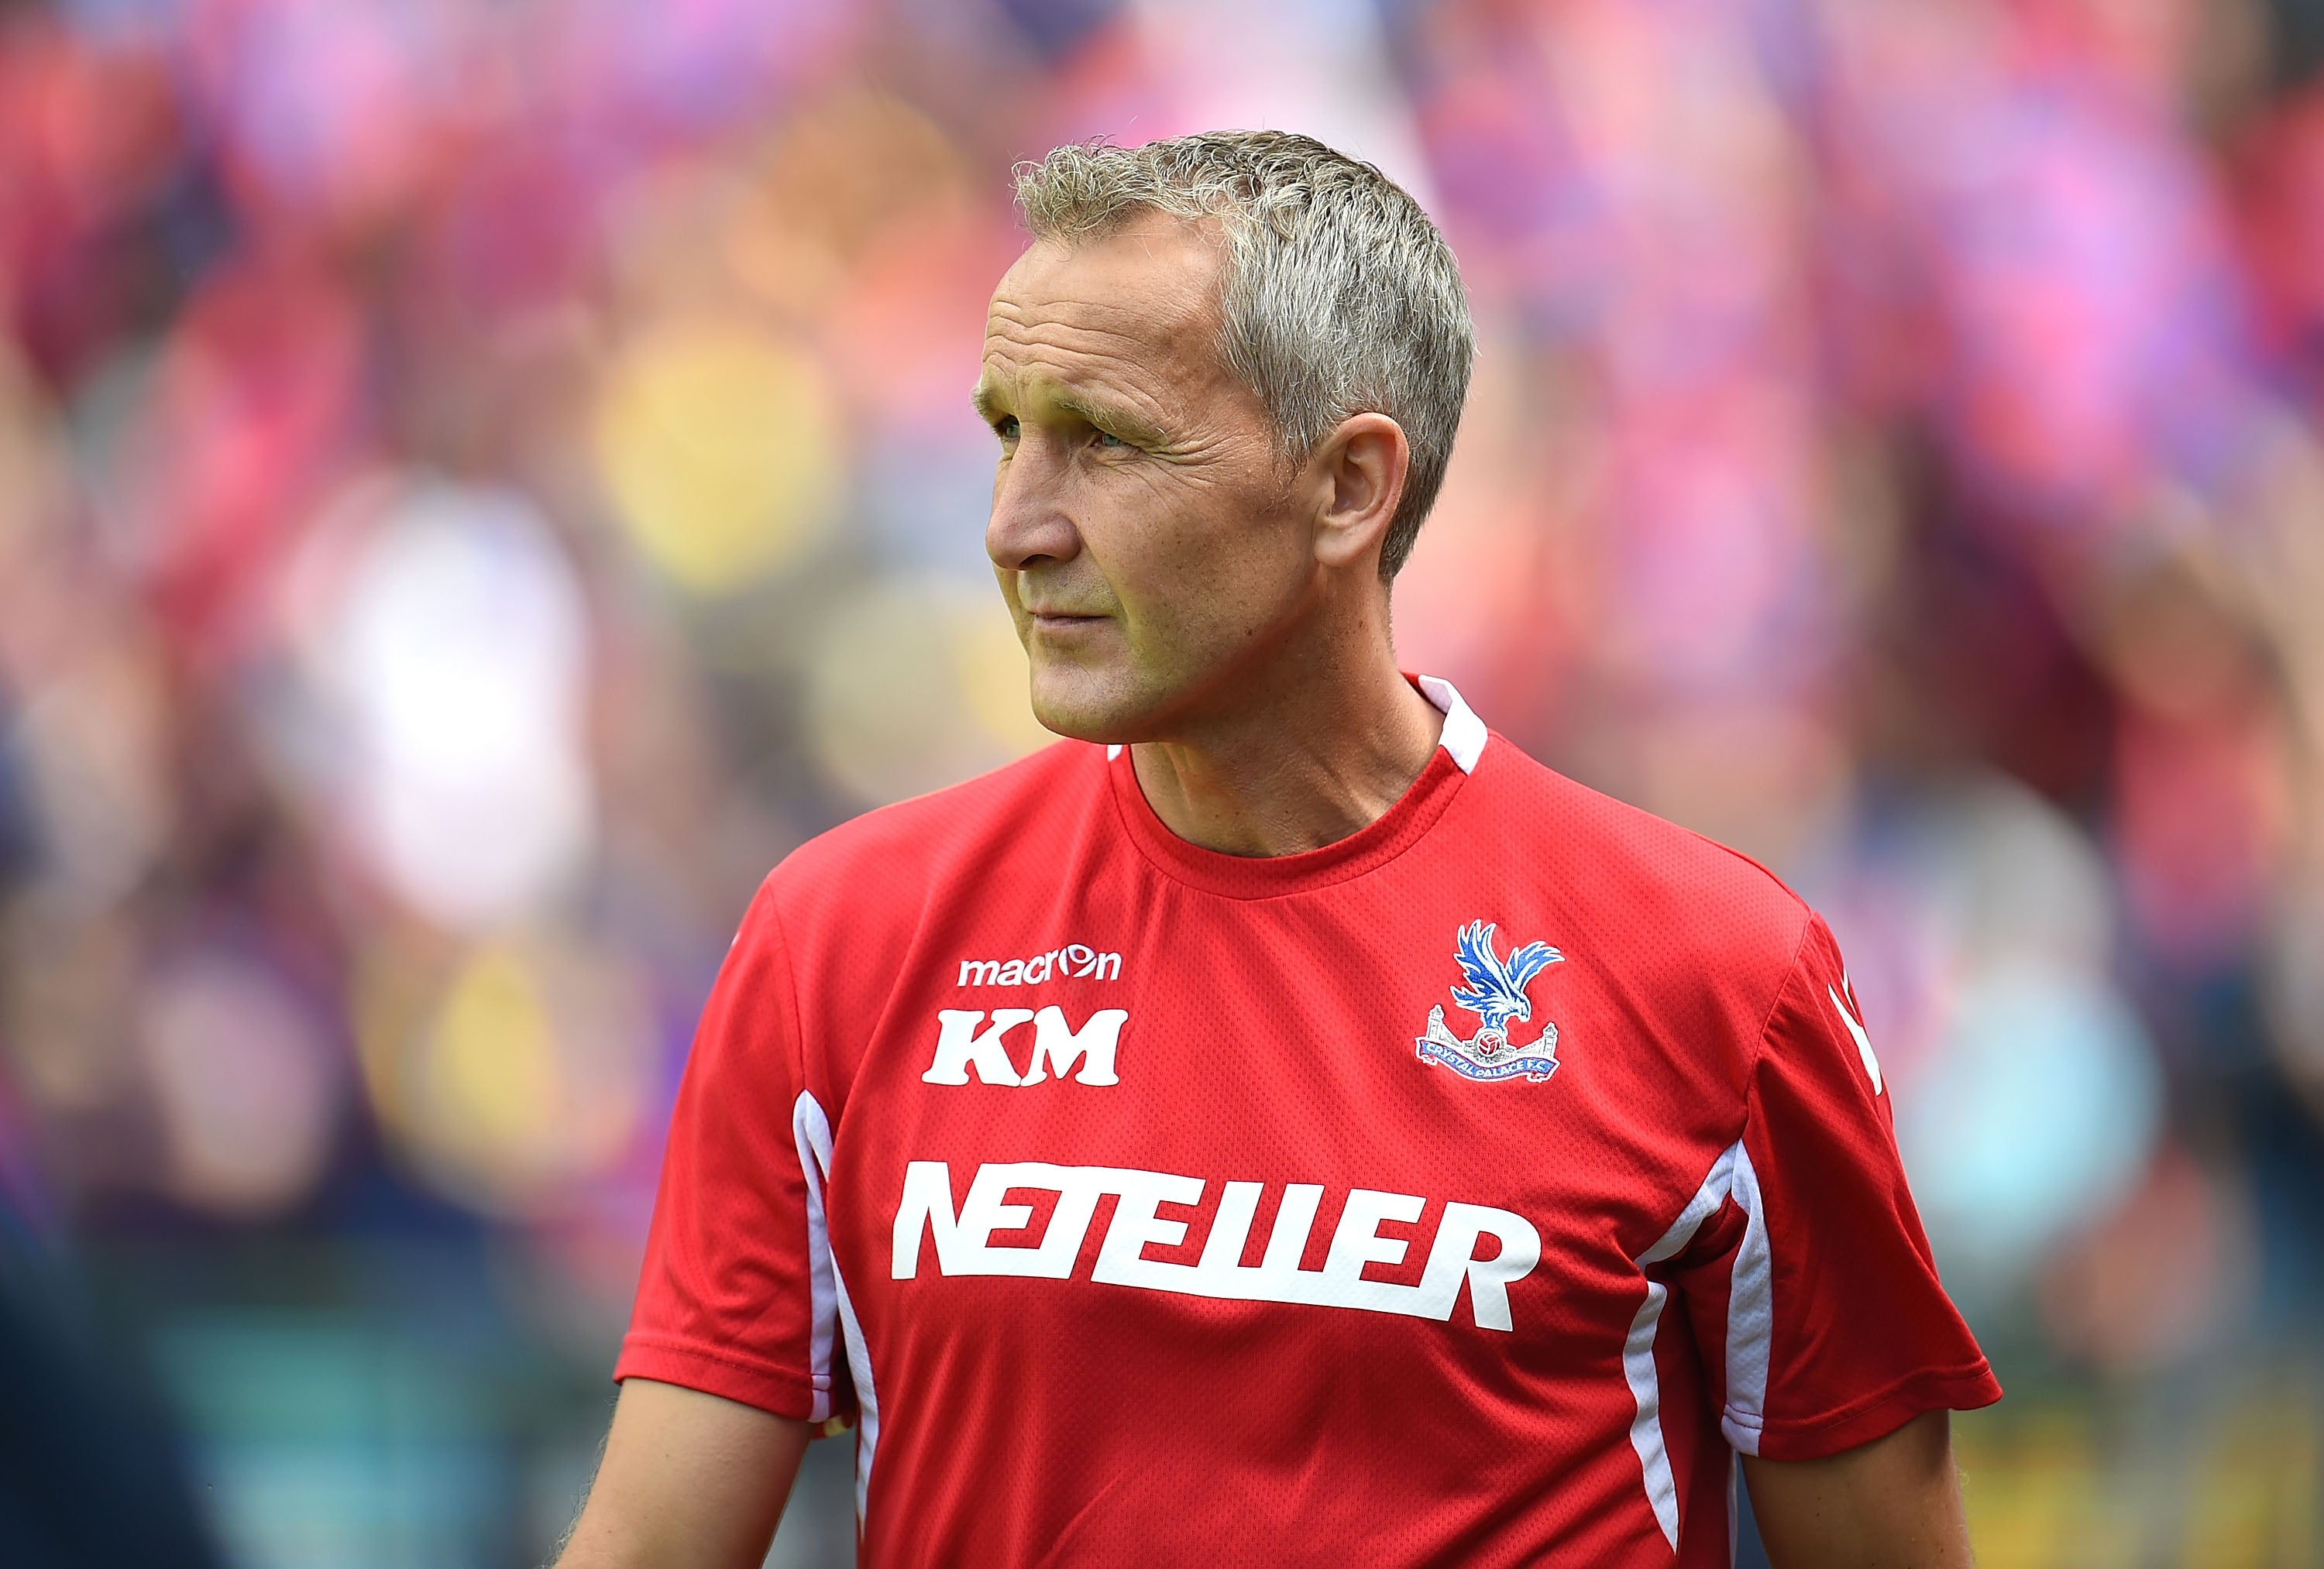 Keith Millen was once again in temporary charge after Malky Mackay's appointment was cancelled over his texting scandal.